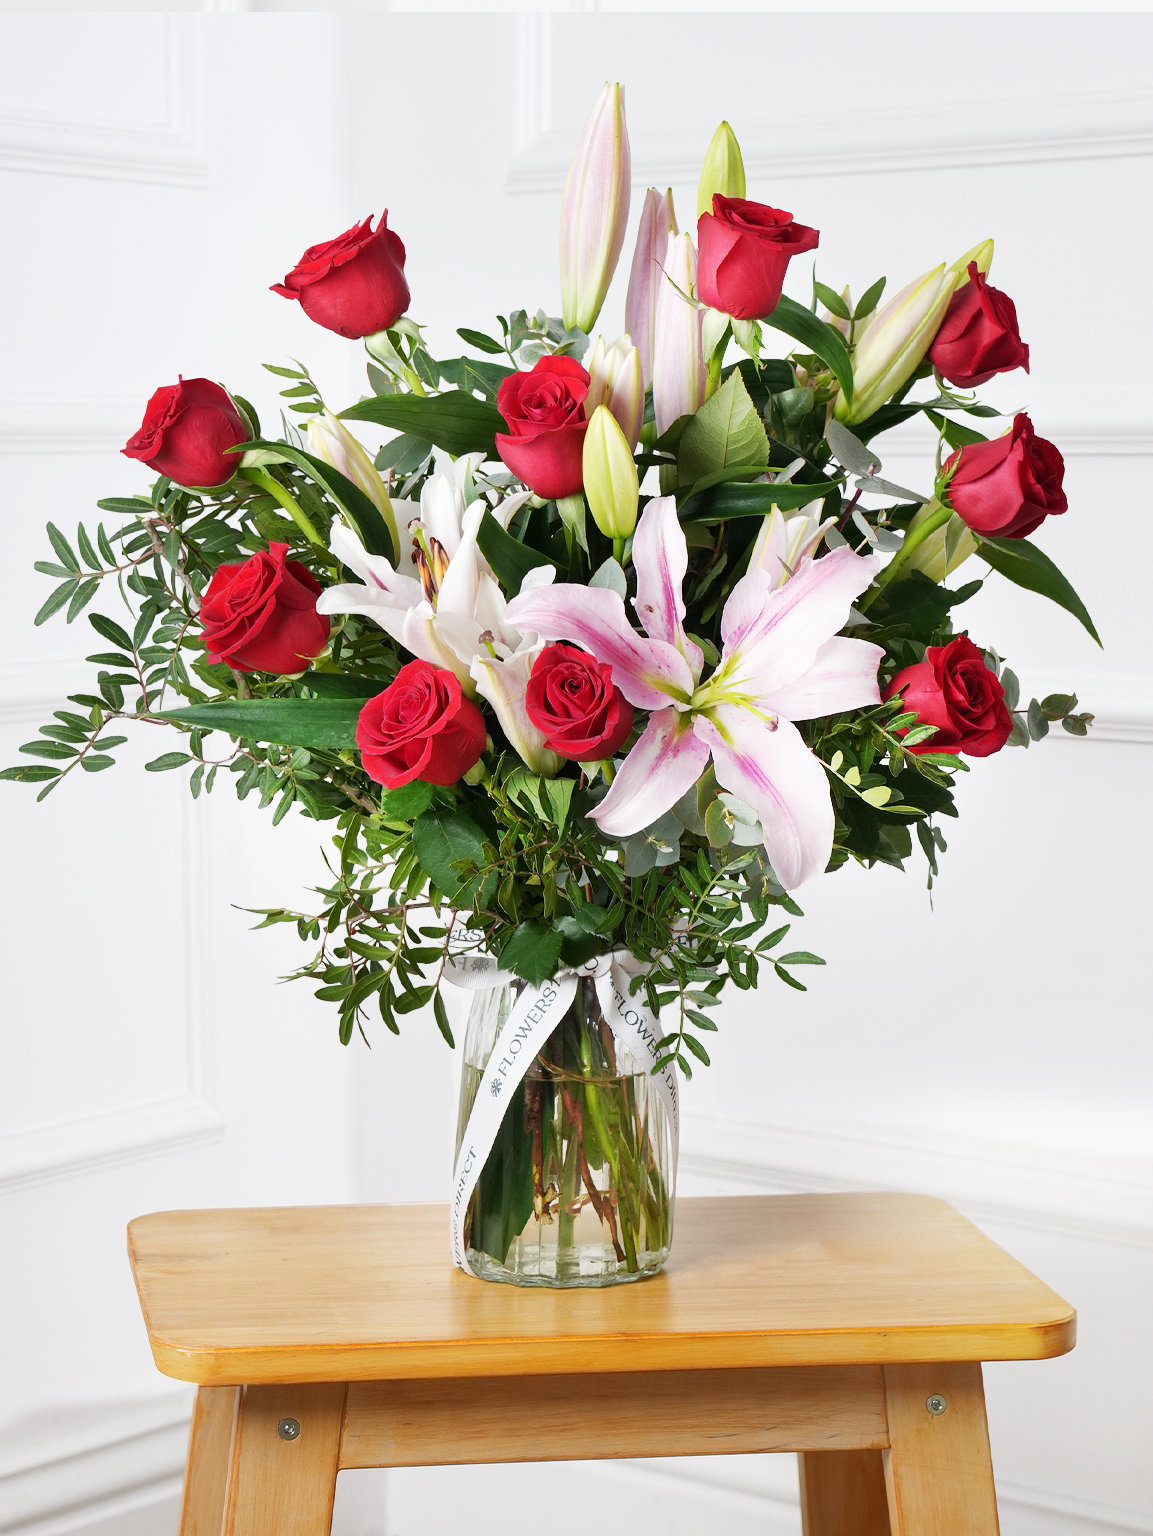 Sympathy Red Roses and Pink Lily in a vase